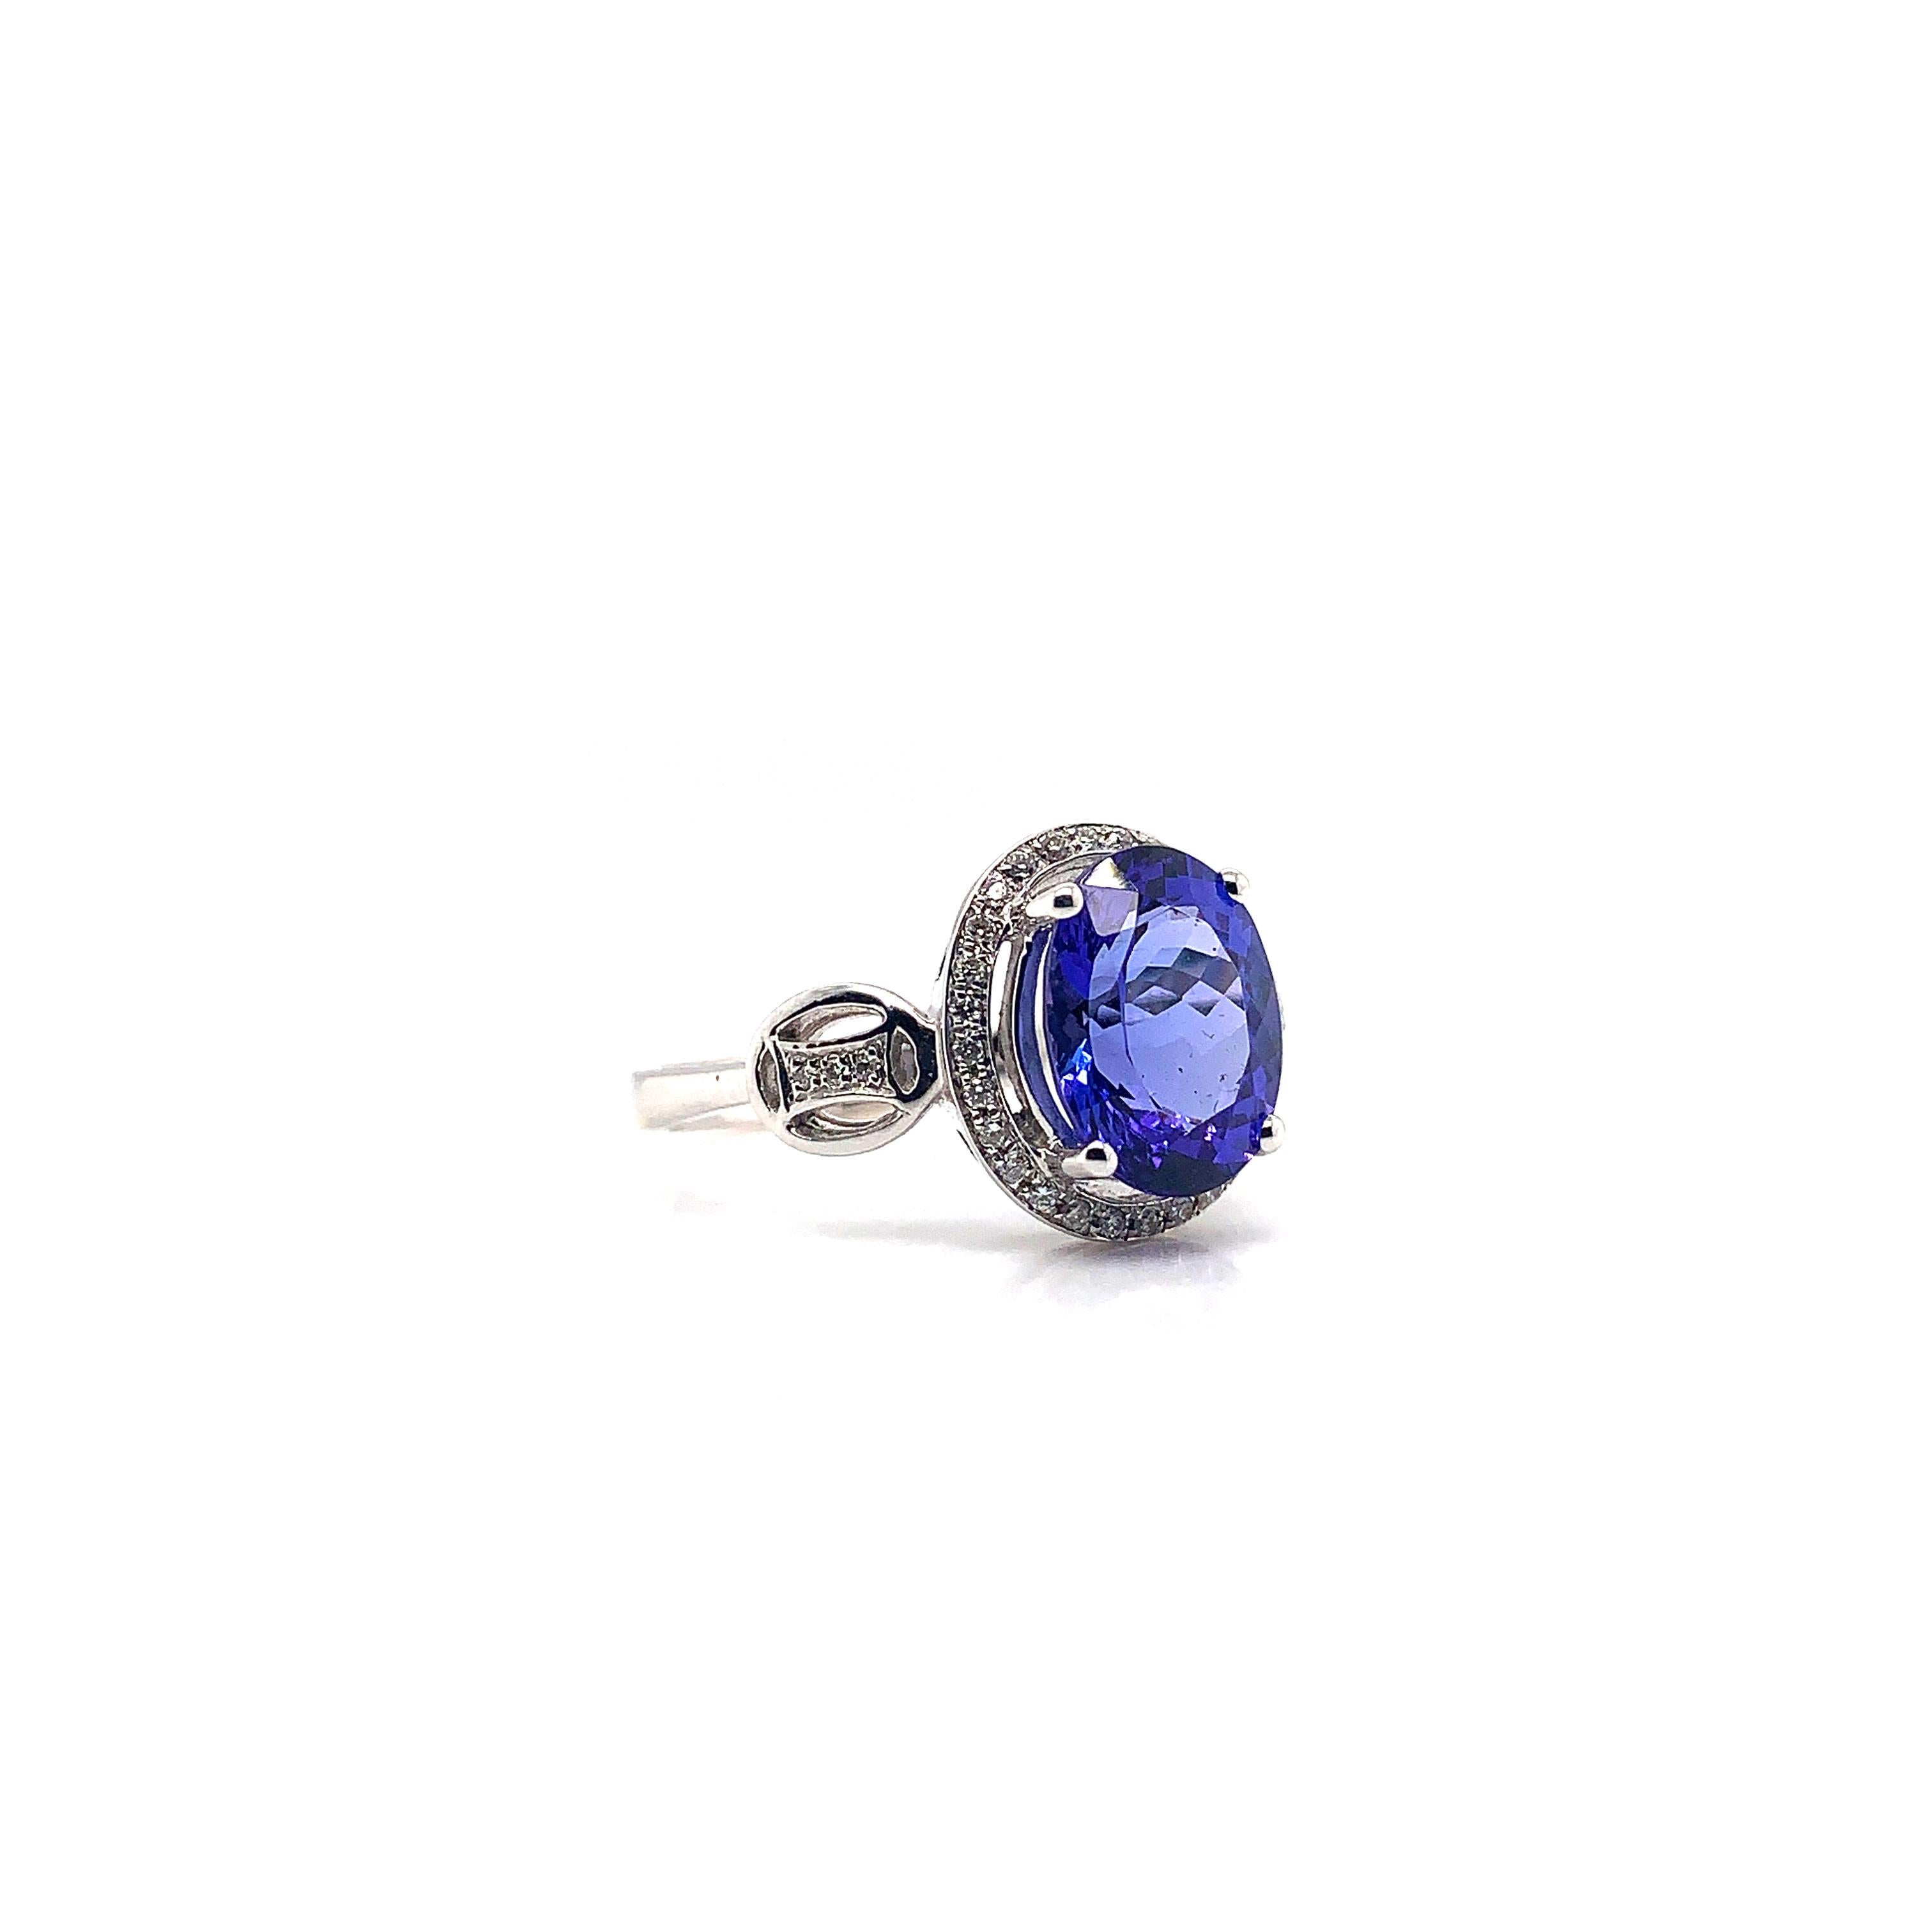 Oval Cut 2.790 Carat Oval Shaped Tanzanite Ring in 18 Karat White Gold with Diamonds For Sale